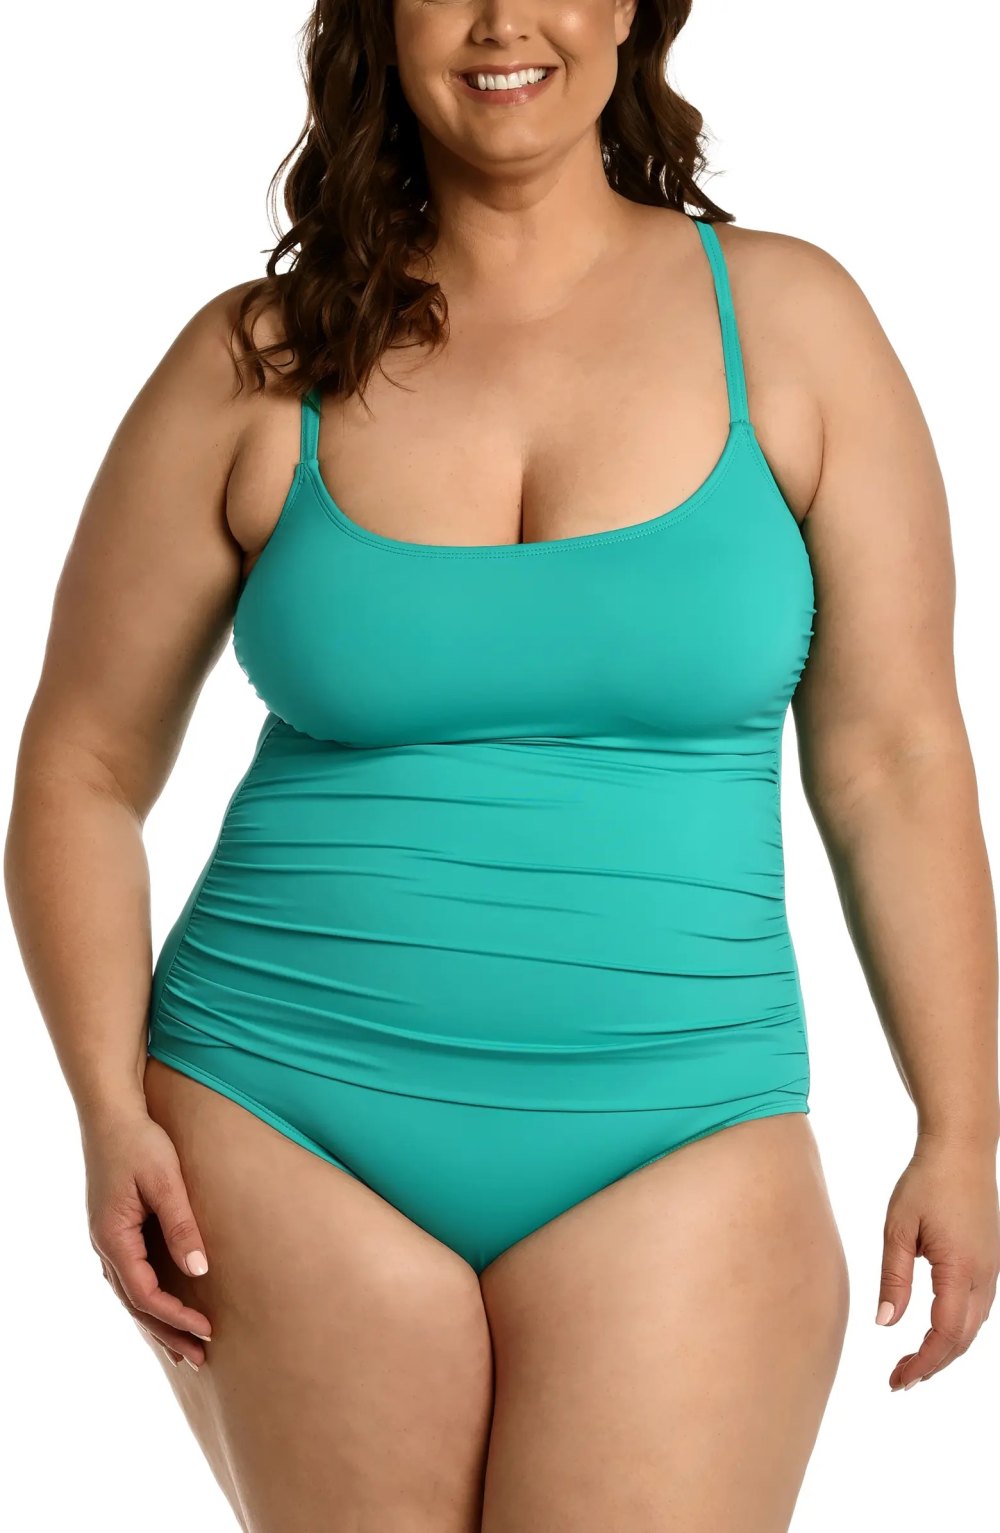 This Flattering Plus-size Bathing Suit Is Only $30